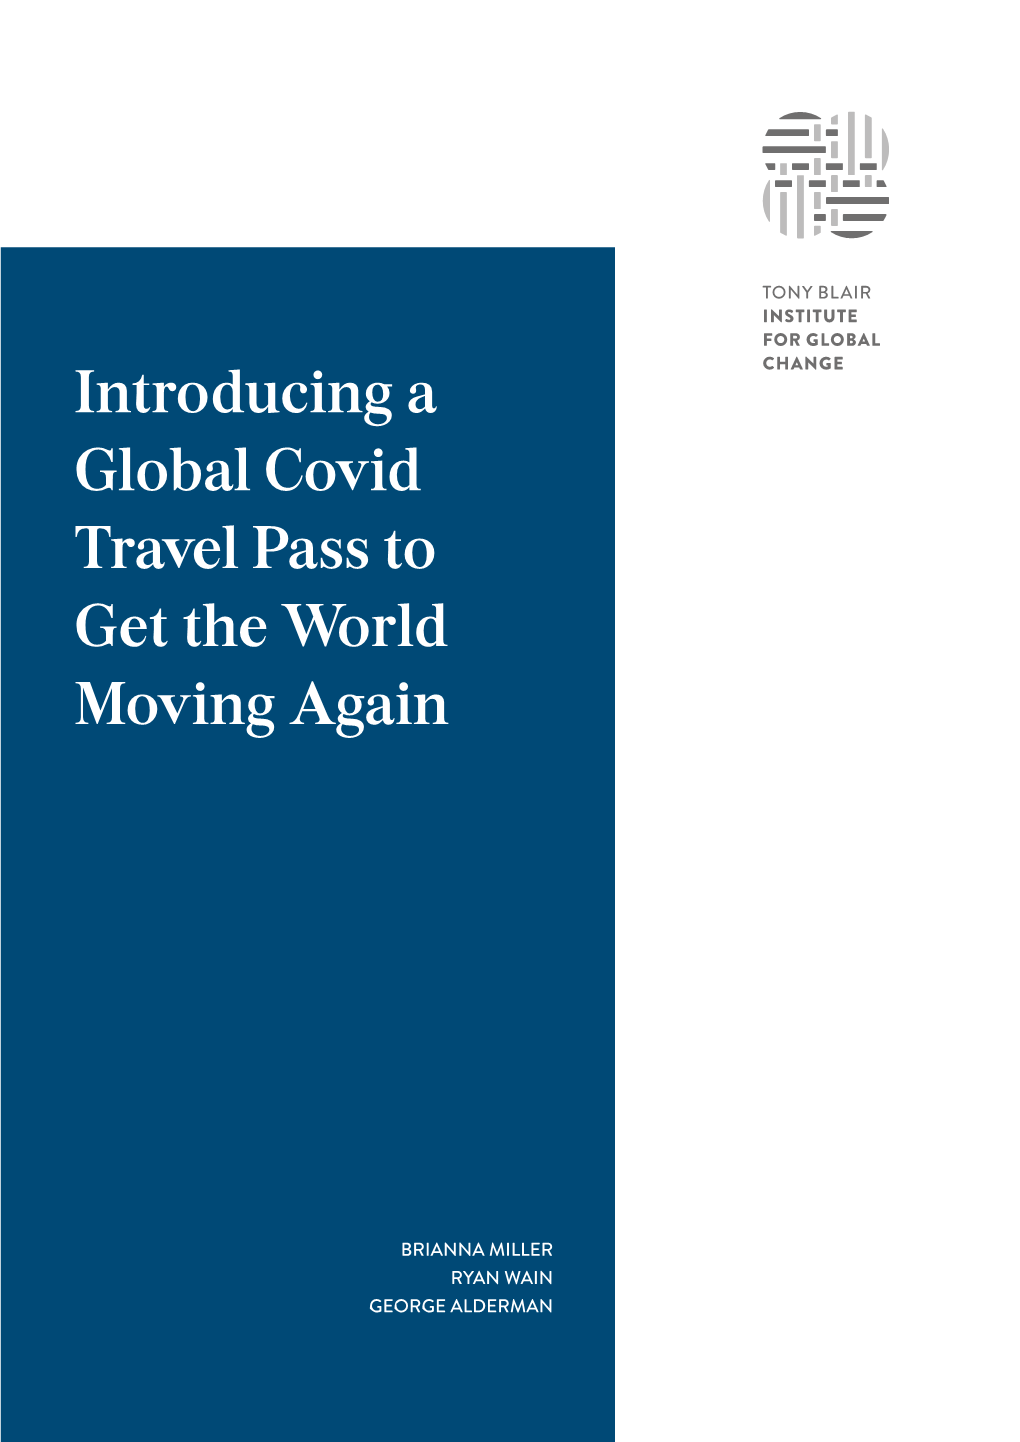 Introducing a Global Covid Travel Pass to Get the World Moving Again